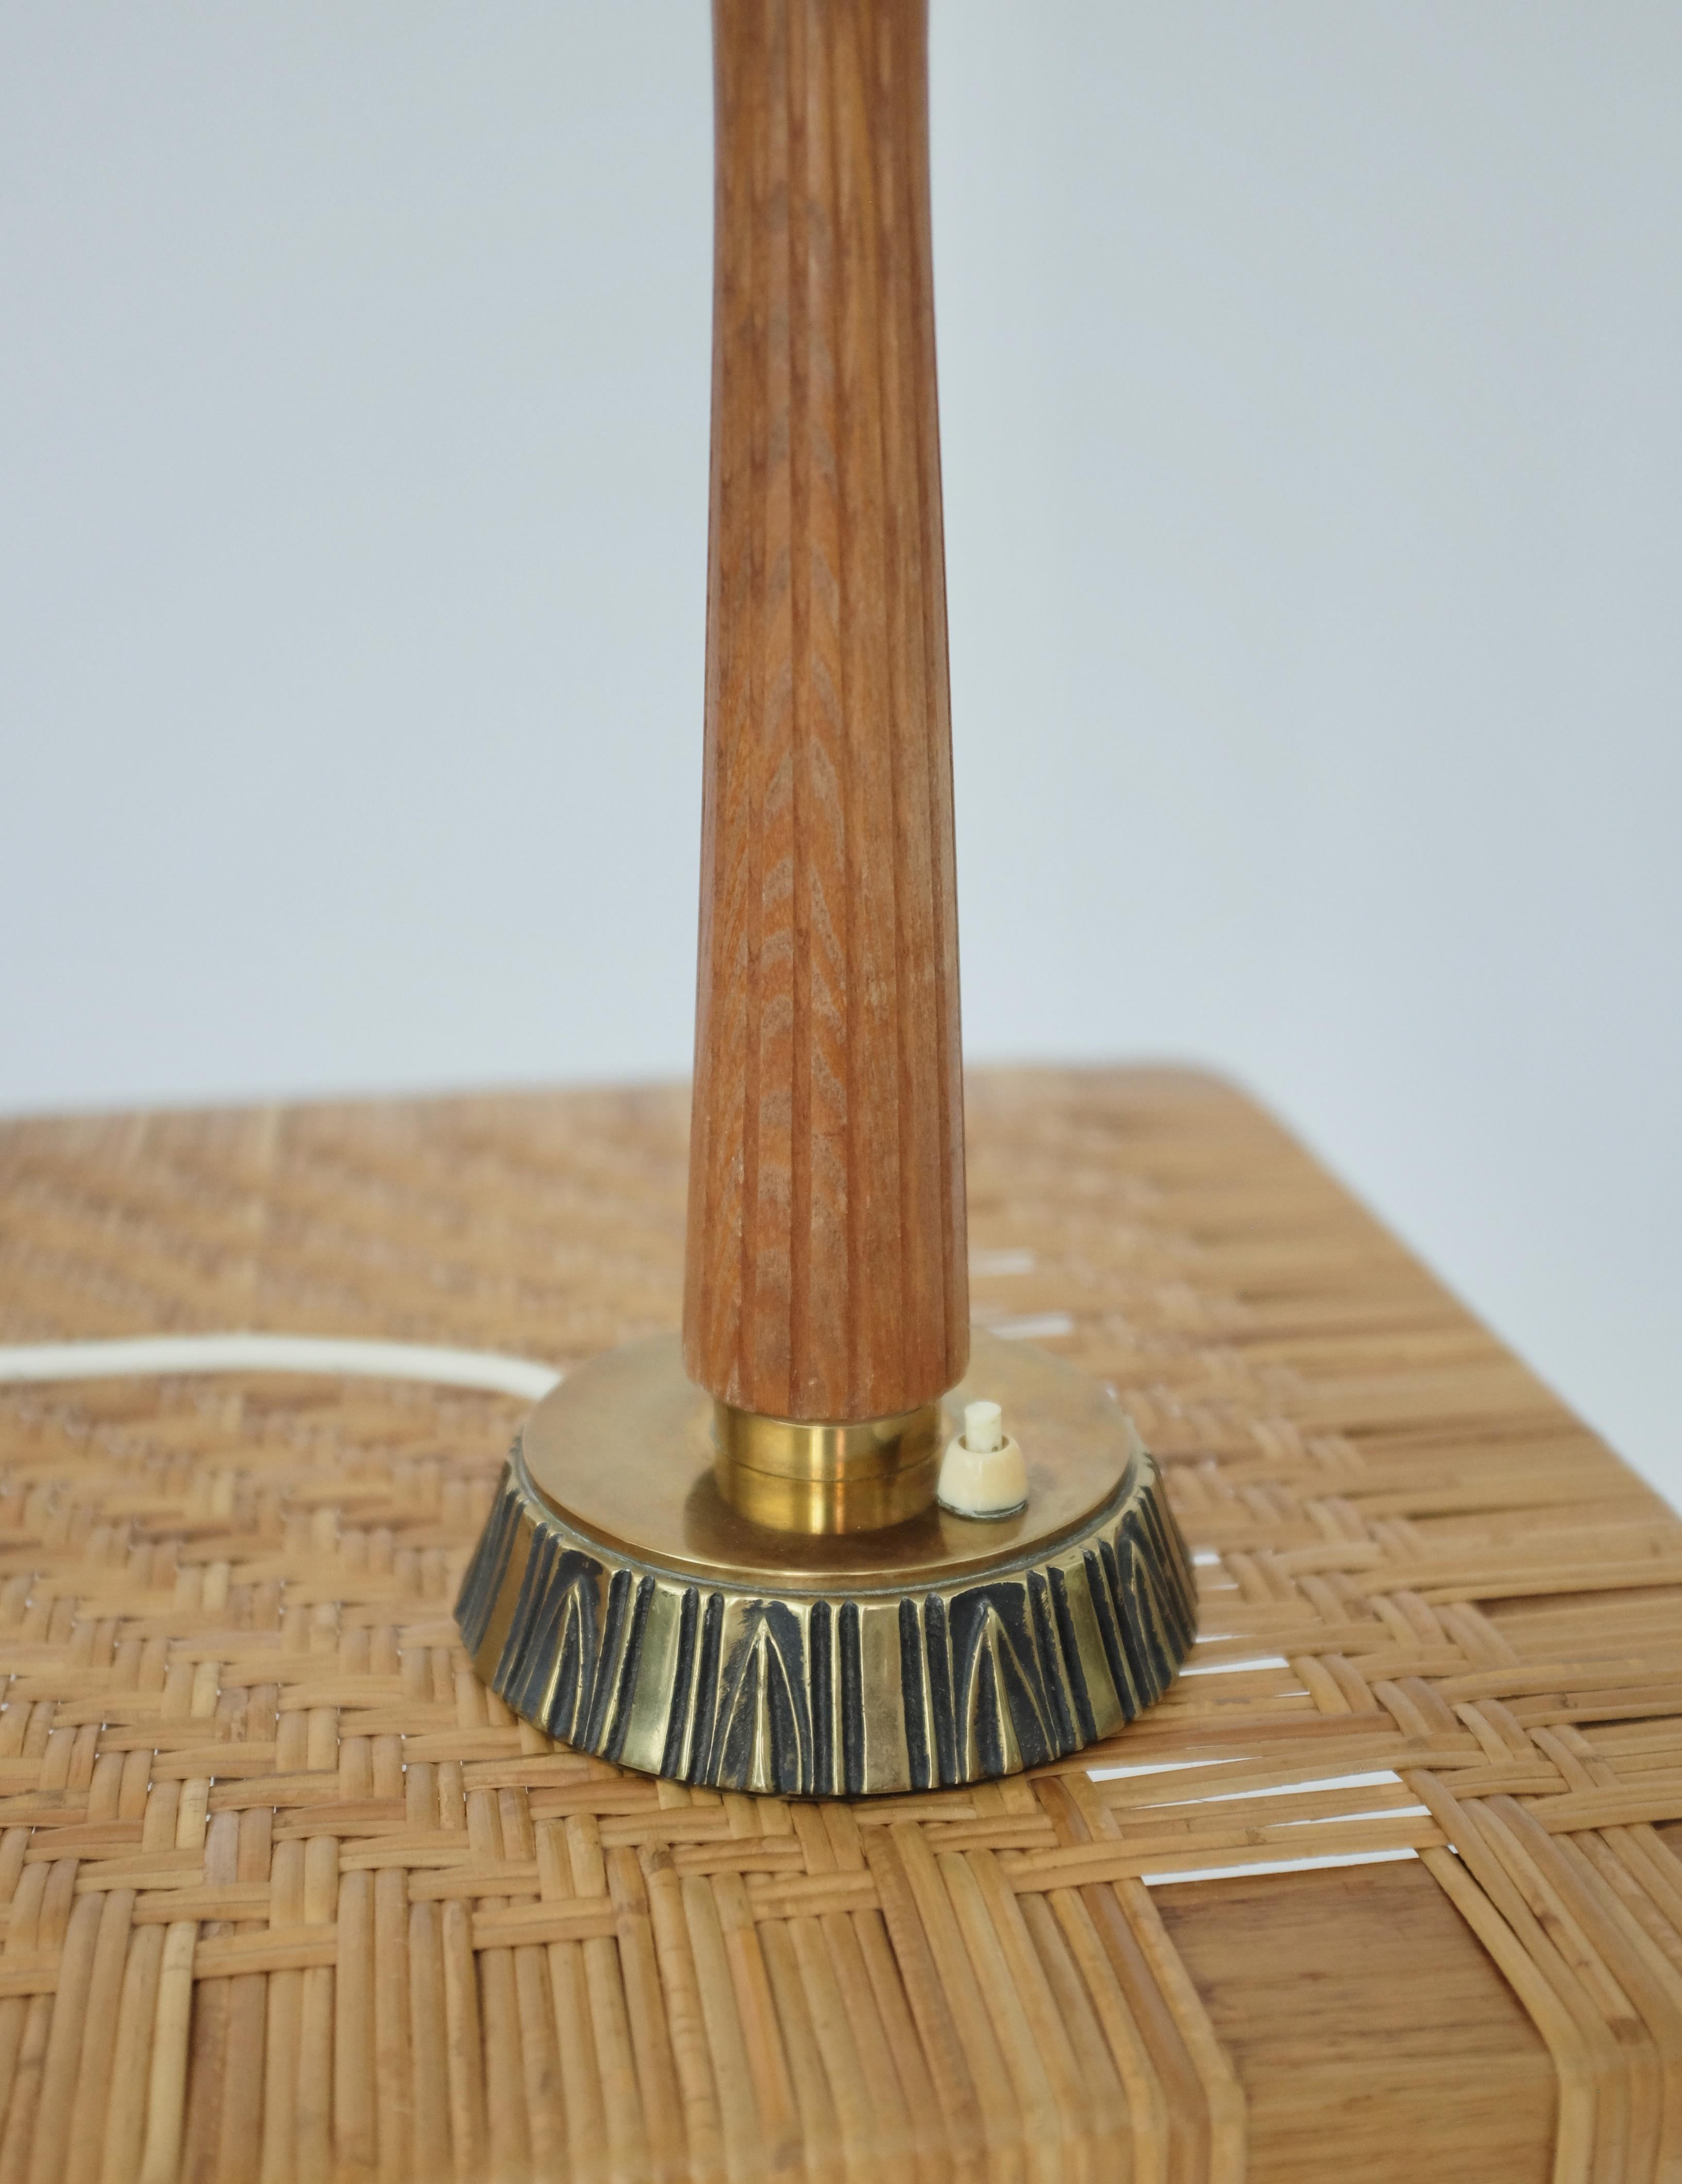 Beautiful 1950's Teak and Brass table lamp by Sonja Katzin for ASEA. Teak handle and brass foot with carved stripes pattern. Label with ASEA model 1141. In a very good condition with a nice shine to the brass and a new lamp shade. Sonja Katzin was a